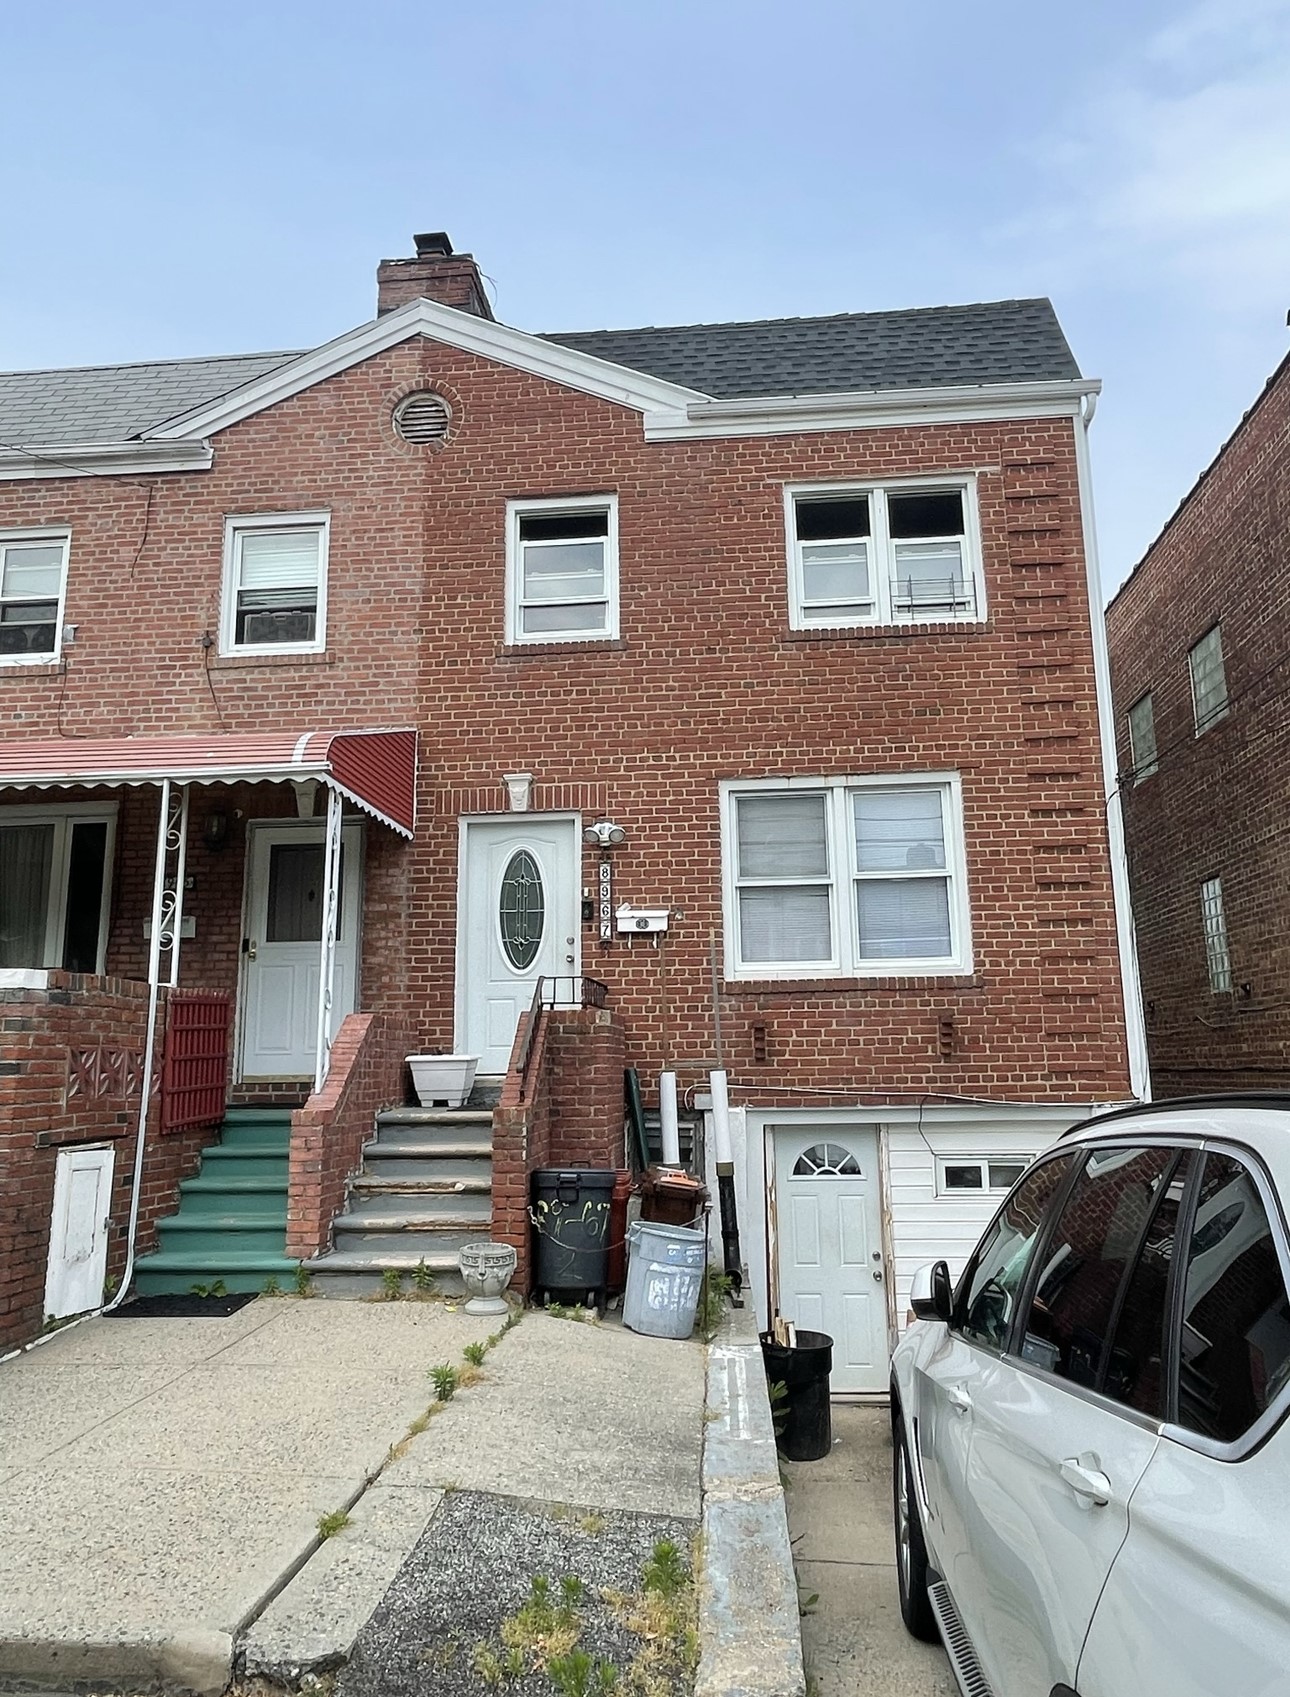 Recently Renovated 1 Bedroom Apartment For Rent In Queens Village. Apartment features, Hardwood flooring, Eat in Kitchen with Kitchen Pass-through, 1 Full Bath, Ample Closets throughout. Apartment has been Freshly Painted. Near Shops and Transportation.